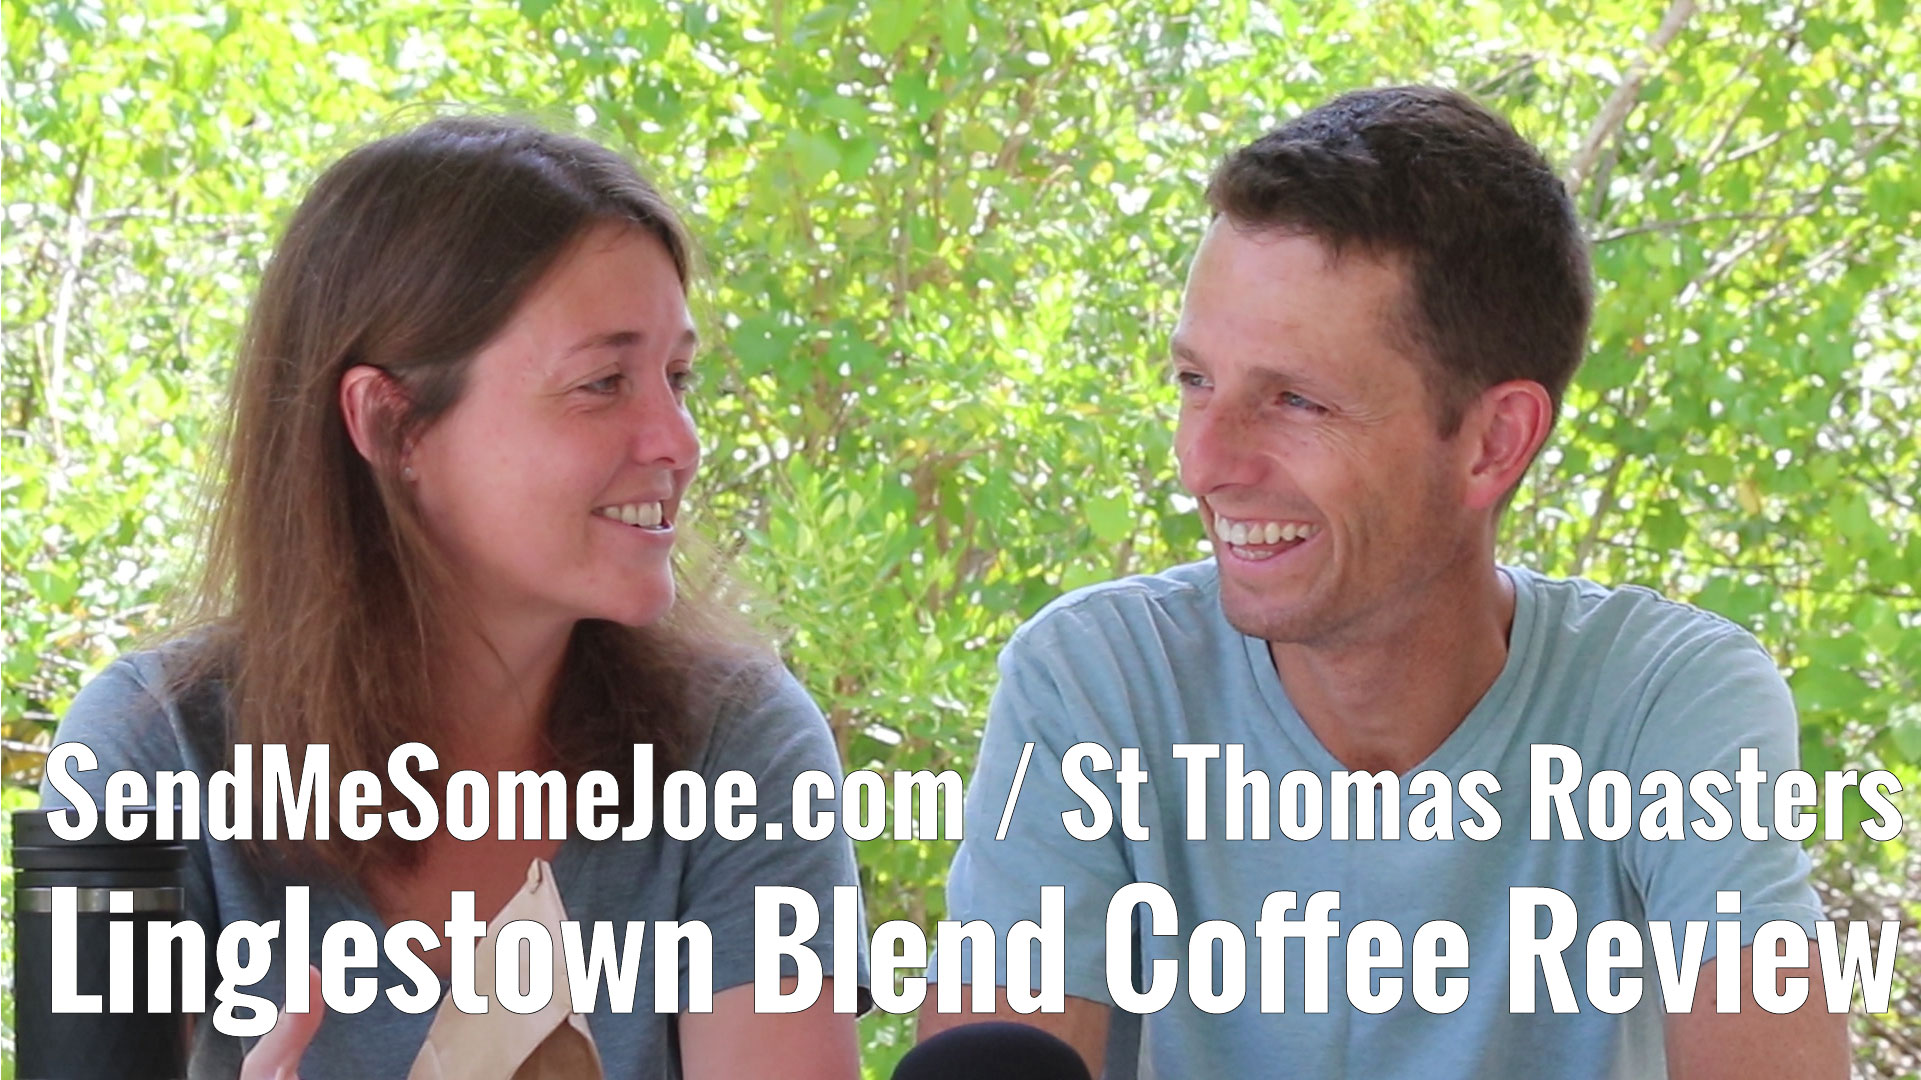 Video thumbnail for the review of Linglestown lend by St thomas roasters